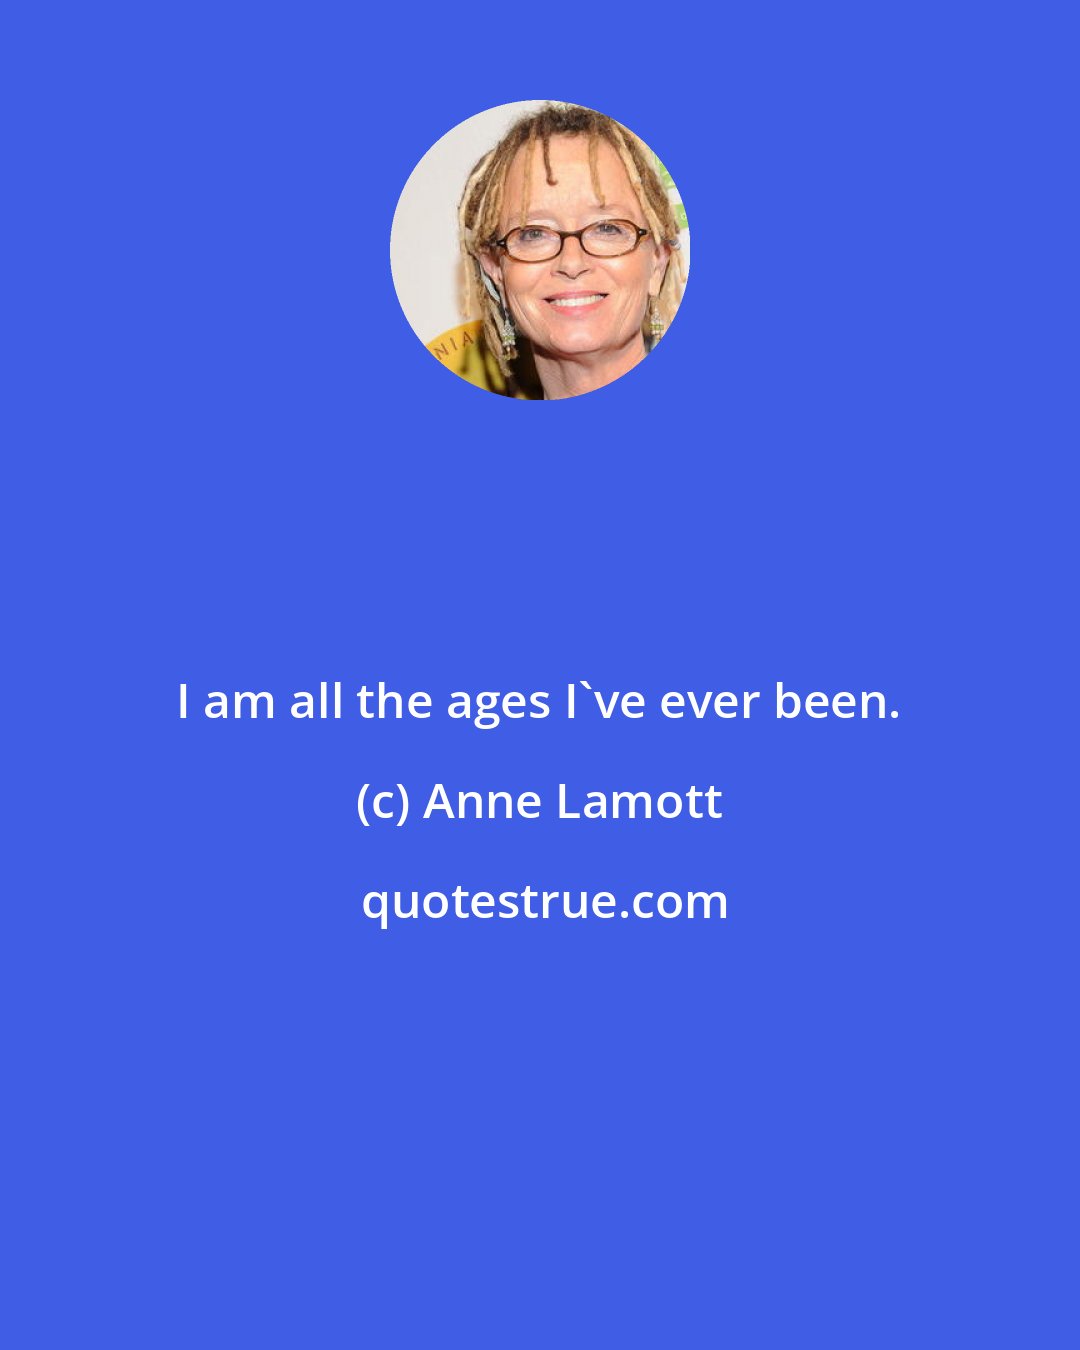 Anne Lamott: I am all the ages I've ever been.